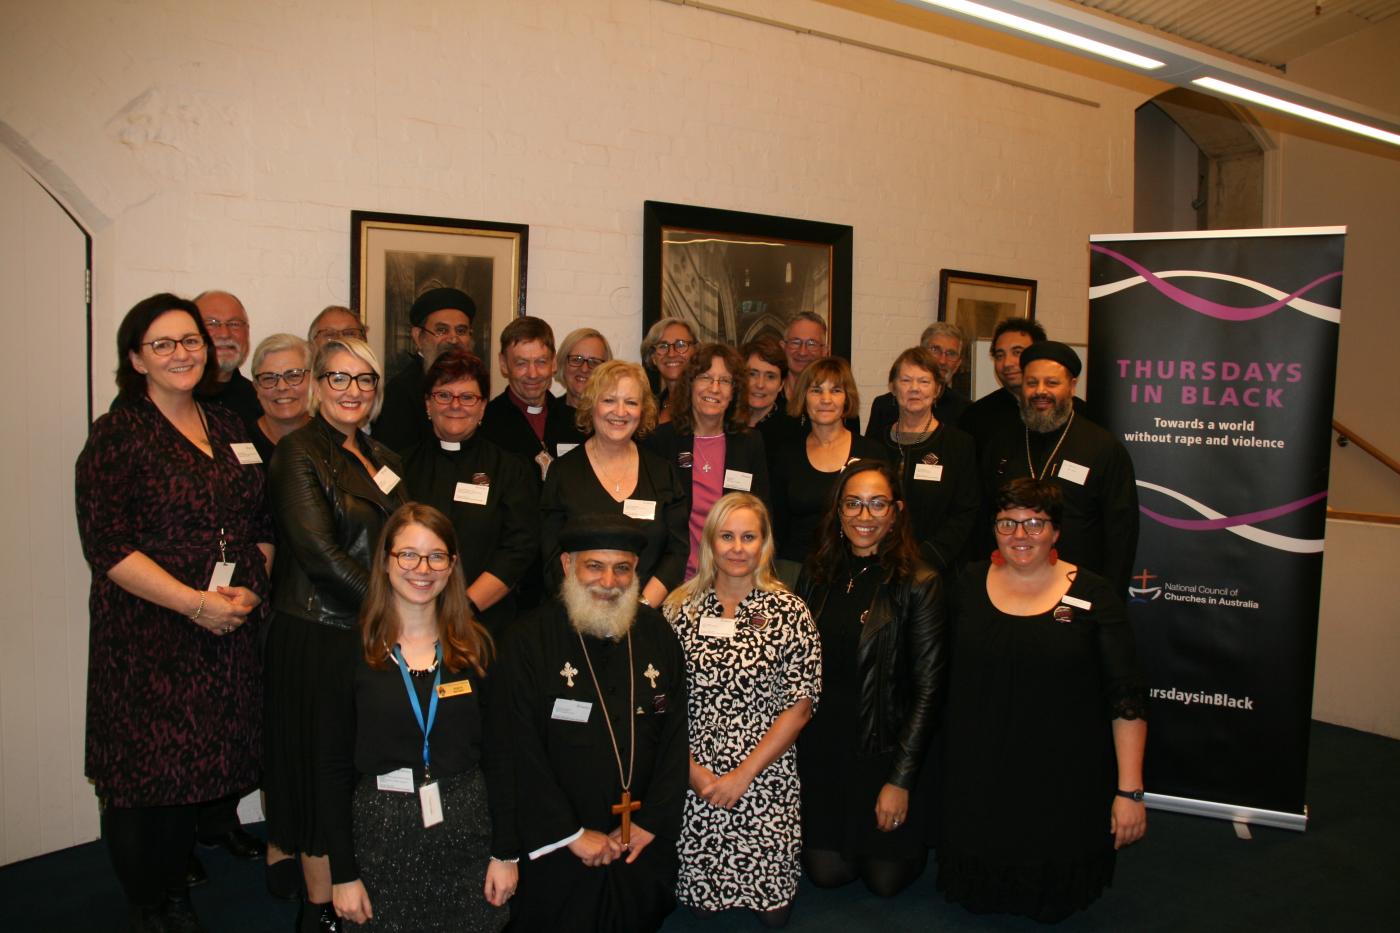 Participants of a May 2 roundtable on domestic and family violence organized by the National Council of Churches in Australia mark Thursdays in Black. Photo: NCCA 